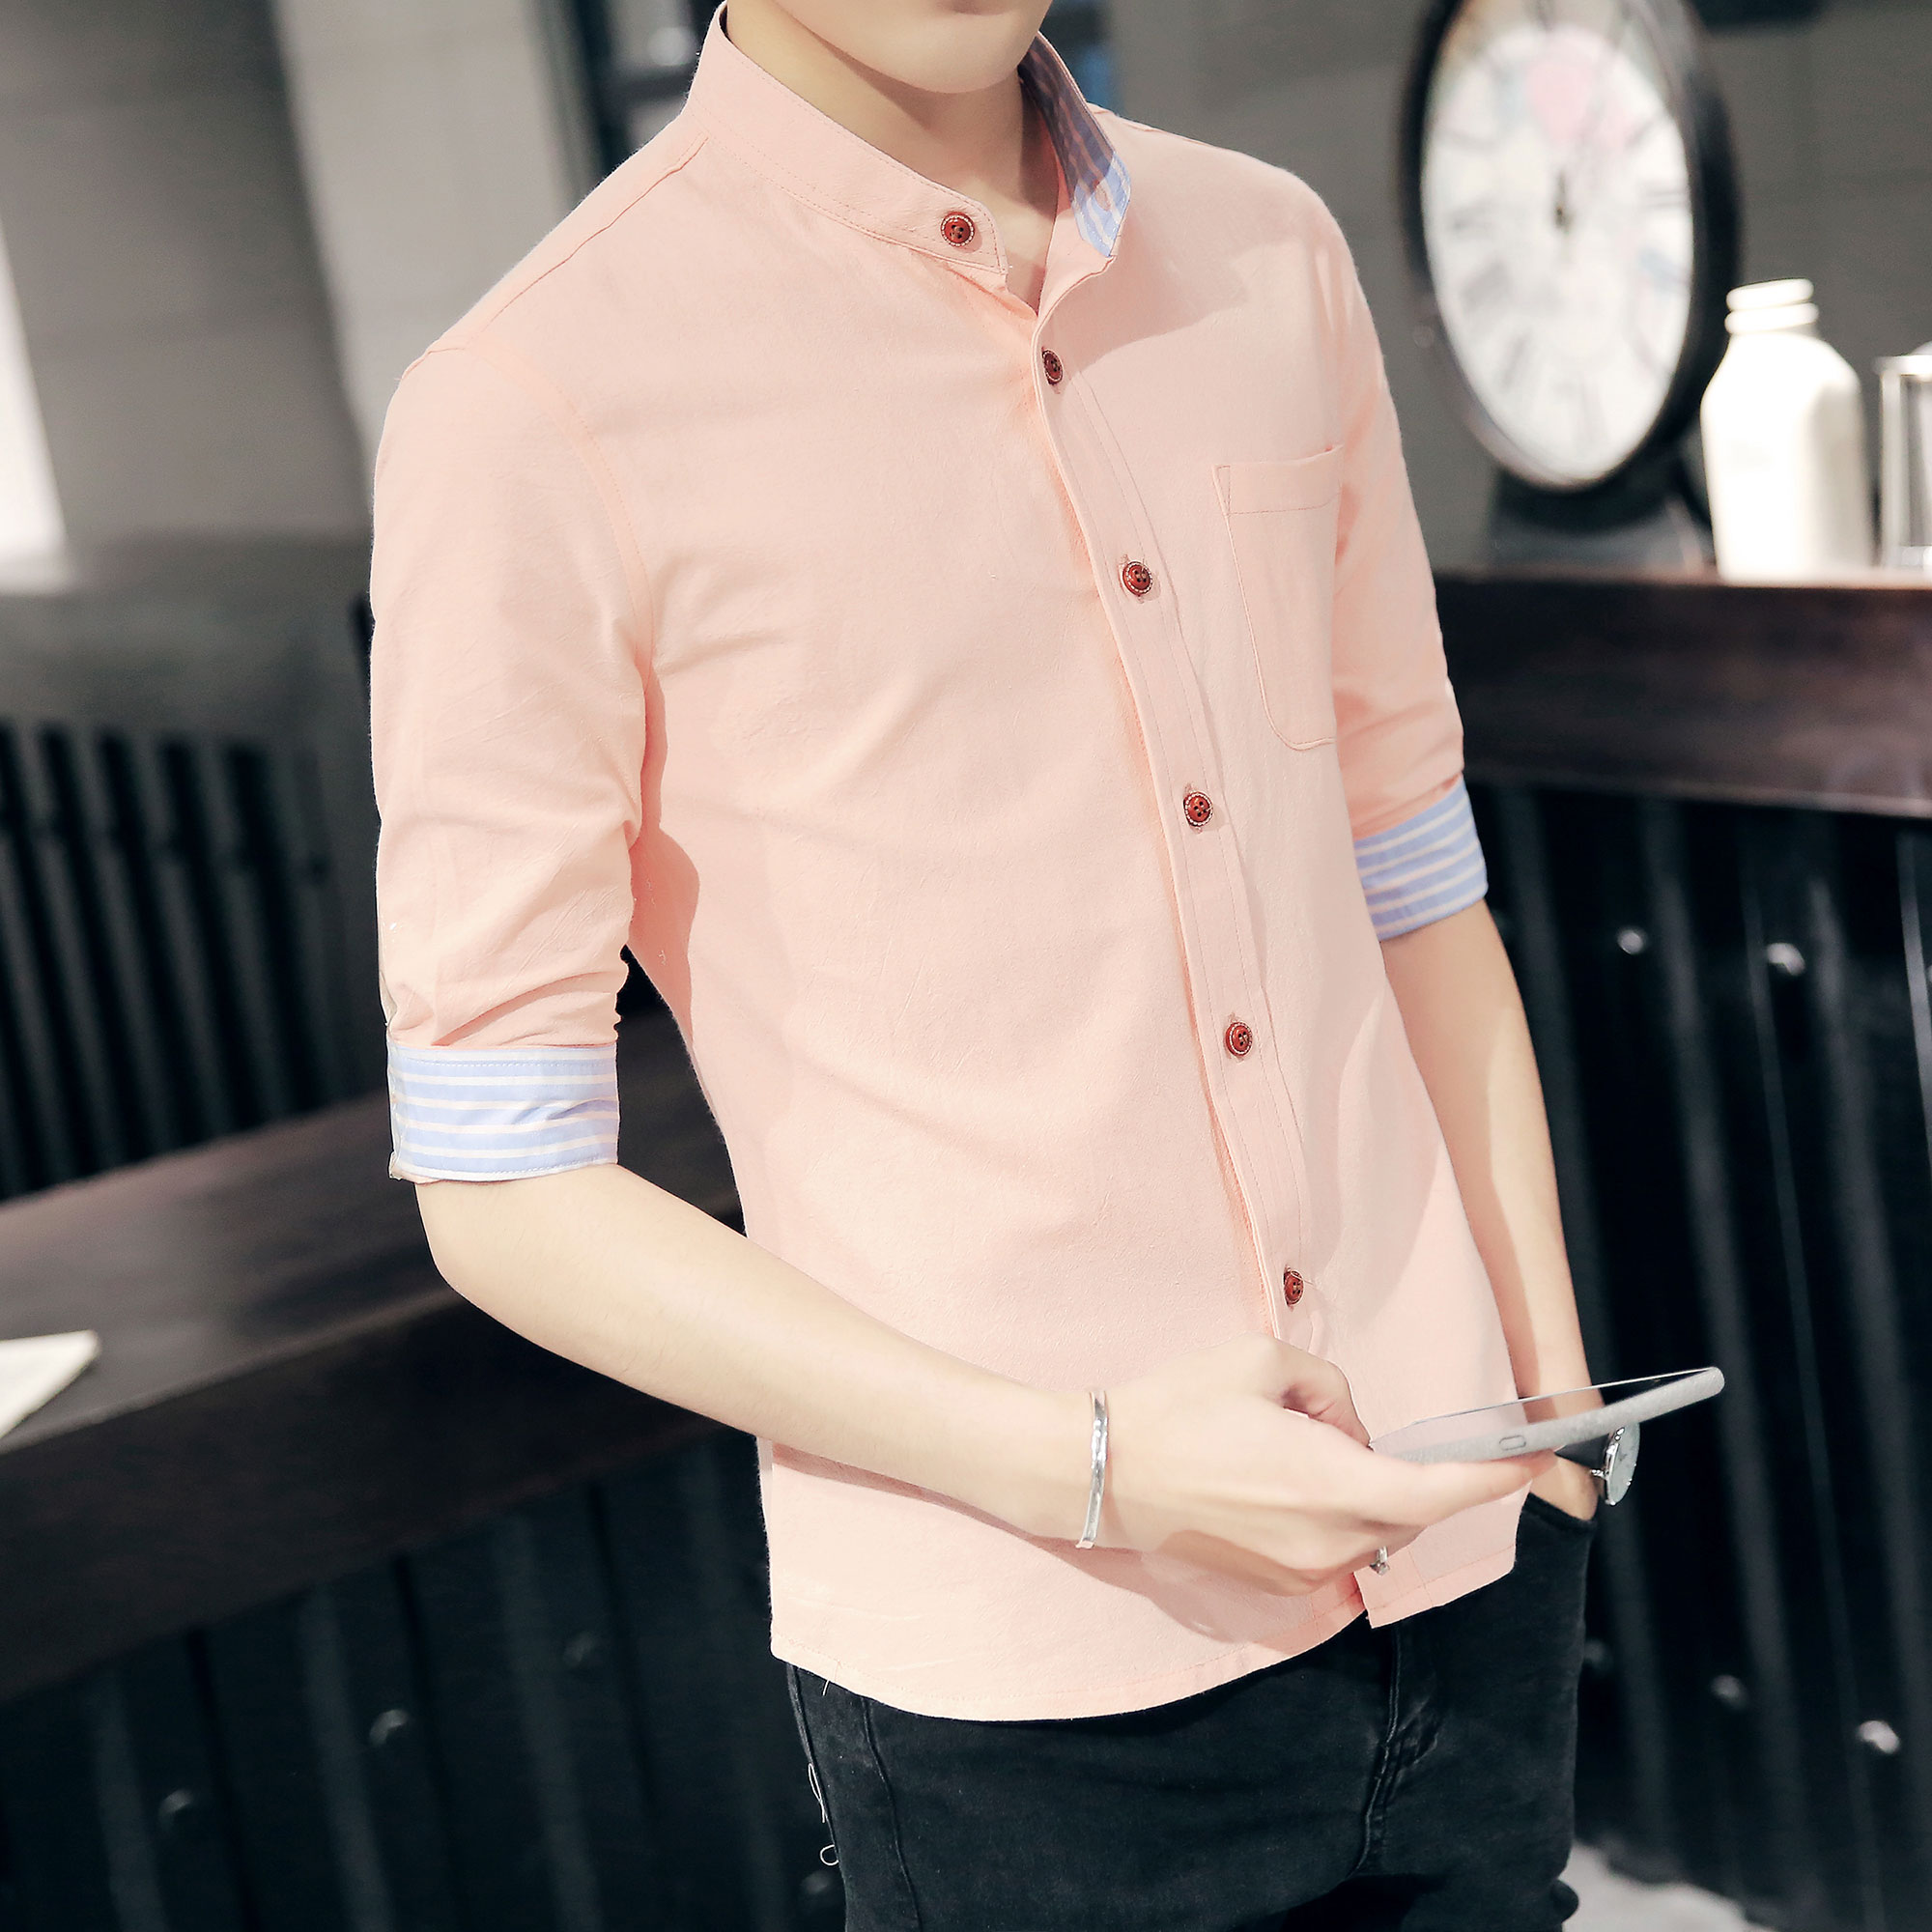 Summer white short sleeve shirt men's Korean version slim fit thin style fashion student stand collar 7 / 7 sleeve shirt middle sleeve